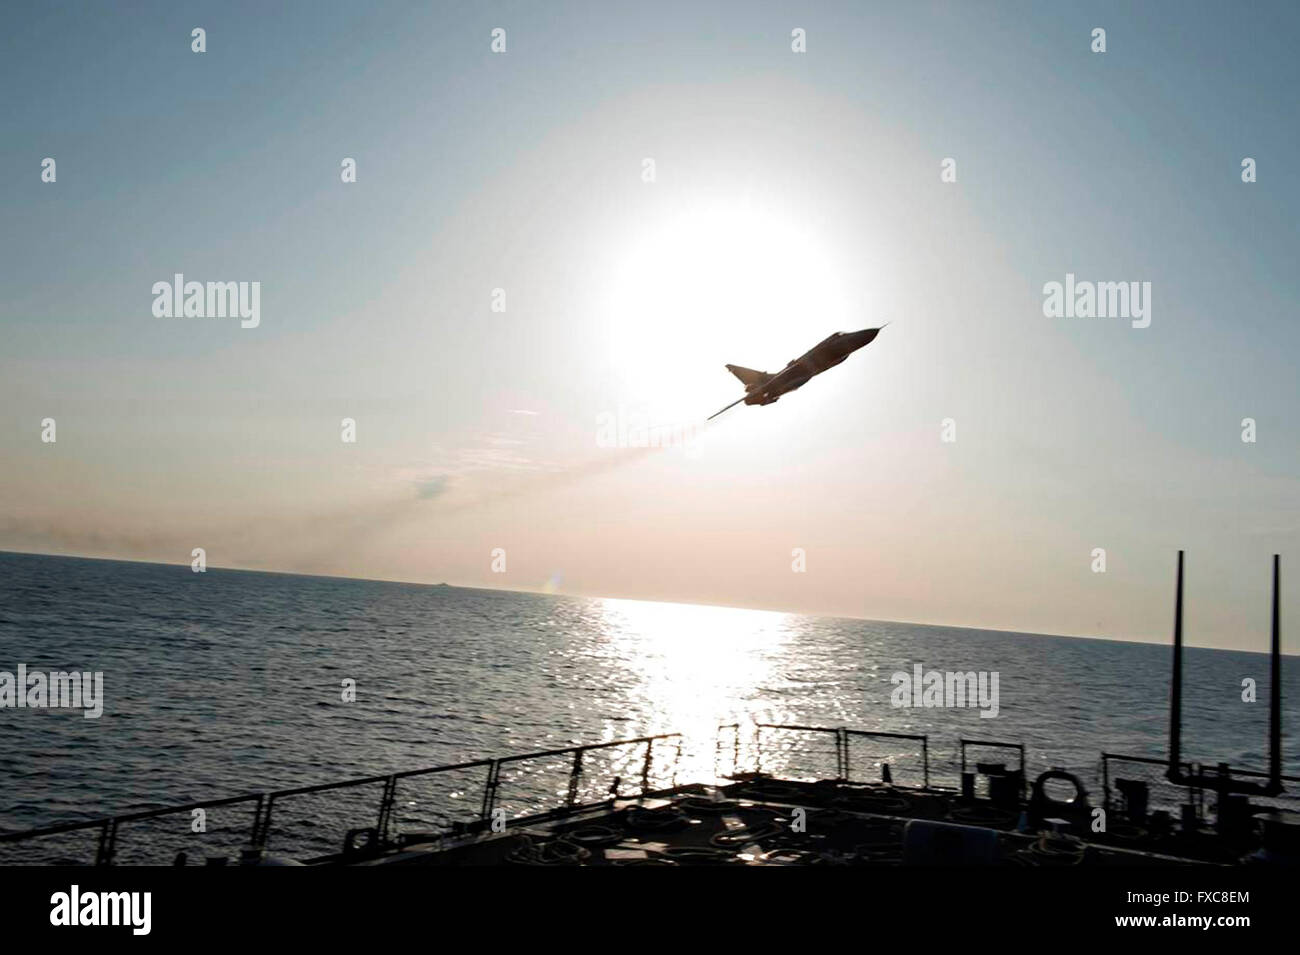 A Russian Sukhoi Su-24 attack aircraft makes a very low altitude pass over the bow of the U.S Navy Arleigh Burke-class guided-missile destroyer USS Donald Cook during a patrol April 12, 2016 in the Baltic Sea. The aggressive flight maneuvers by the Russian aircraft simulated a strafing run. Stock Photo